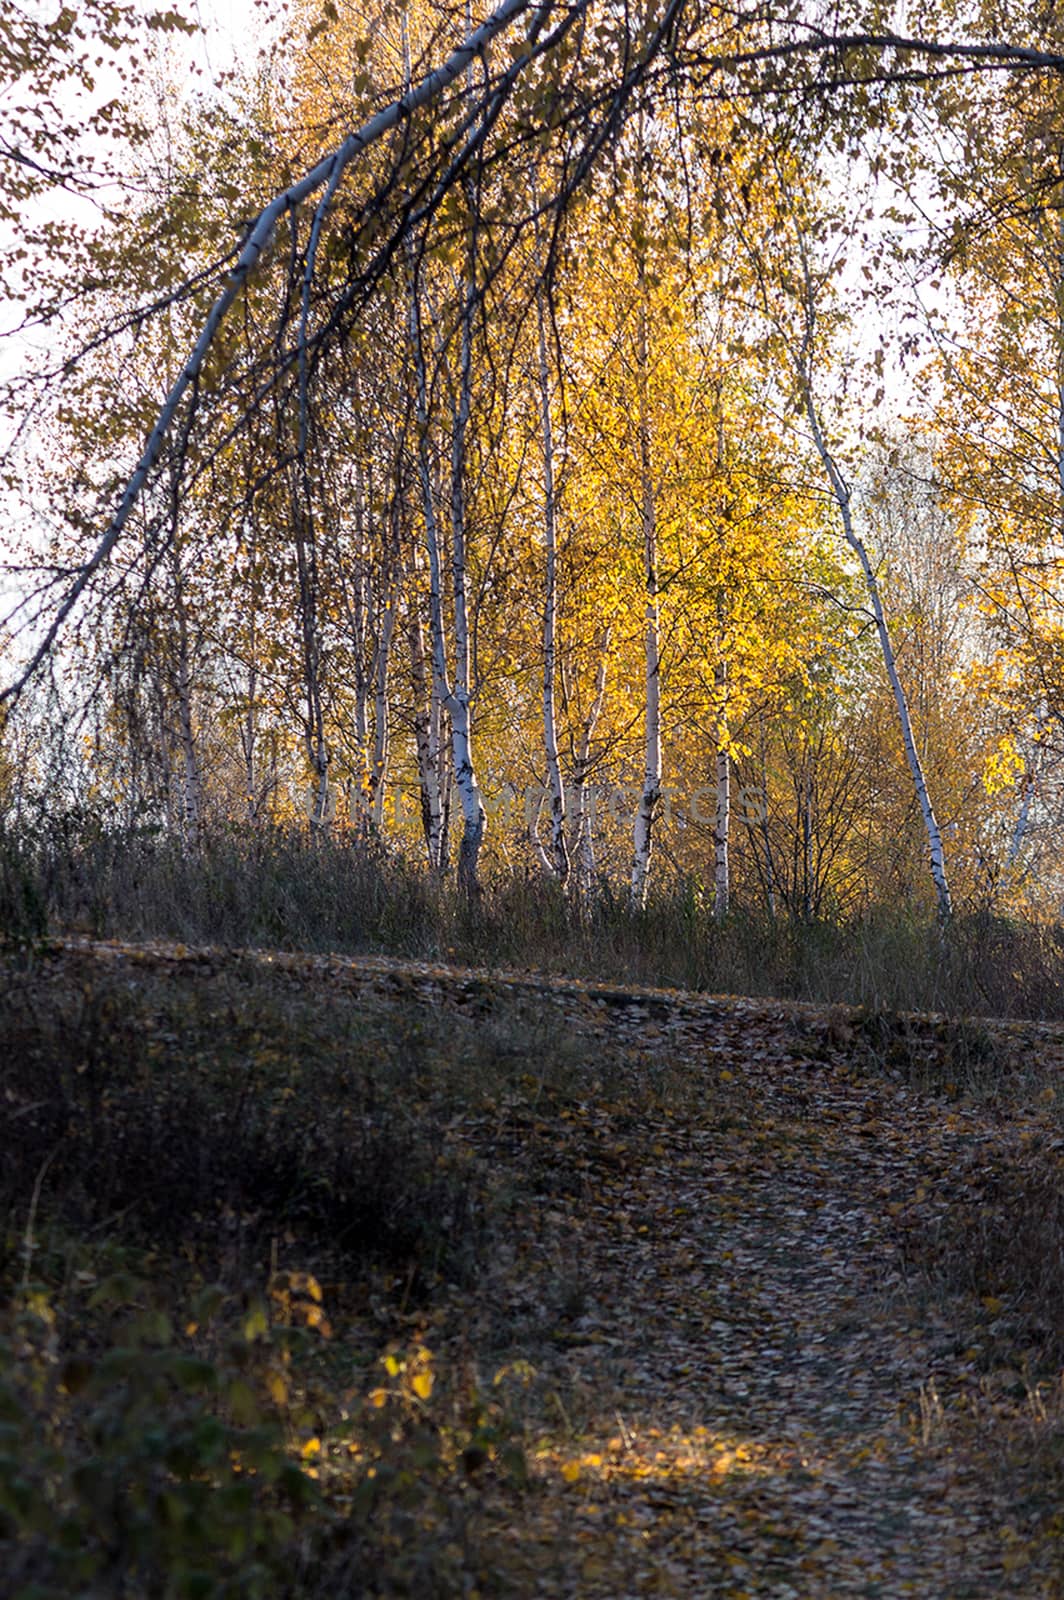 yellow birch leaves in park. Asphalt pavement in the park and birch trees. by DePo